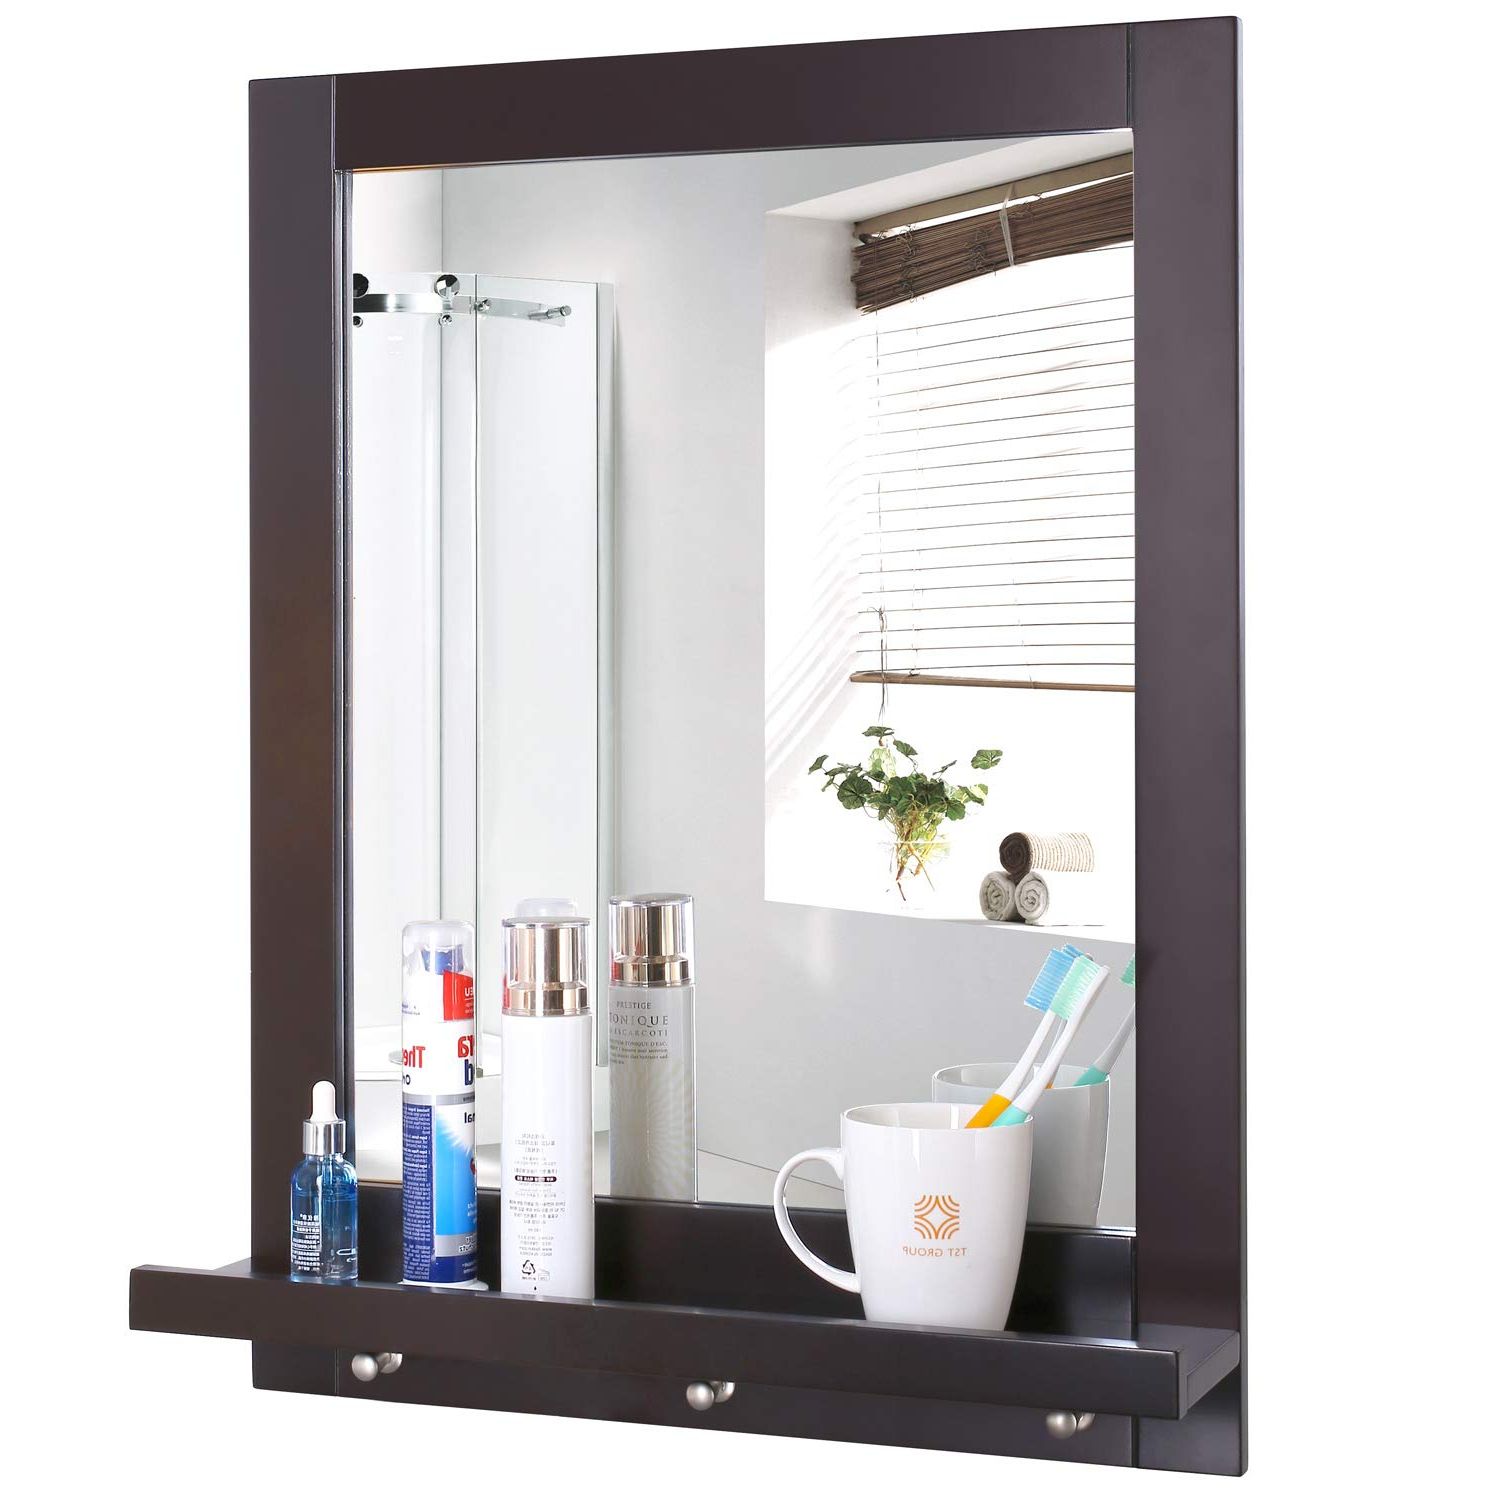 Framing Bathroom Wall Mirrors Intended For Best And Newest Homfa Bathroom Wall Mirror Vanity Mirror Makeup Mirror Framed Mirror With  Shelf And 3 Hanging Hooks Multipurpose For Home, Dark Brown (View 19 of 20)